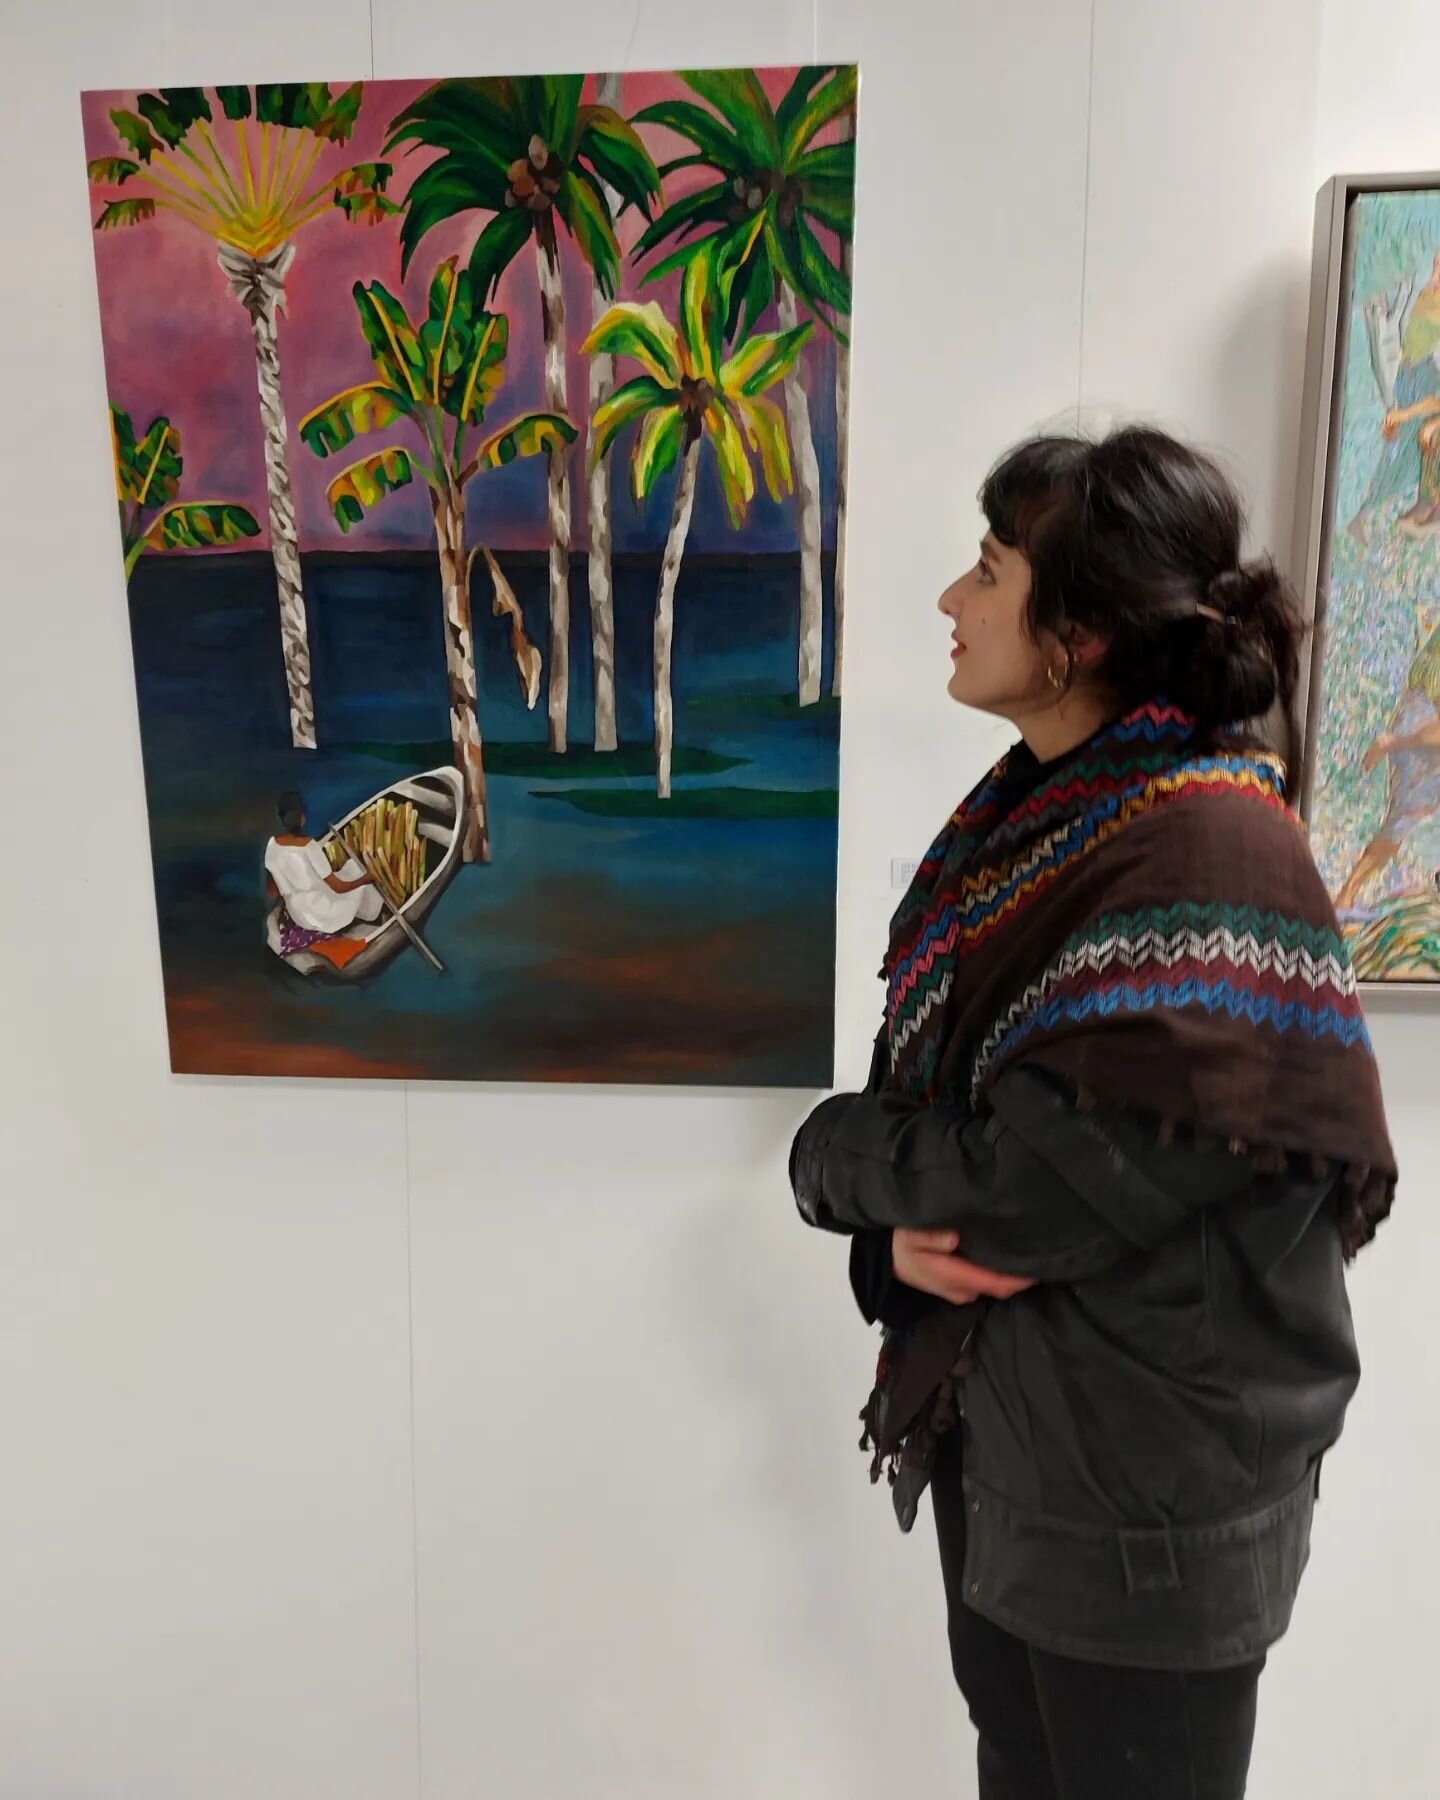 Some pics from the private view on Thursday for 'Branches' an exhibition that I am showing two paintings in: 'Land of many waters' and 'Three Chanie Crows' The exhibition closes tomorrow, 17th of March which features the work of over 50 artists, whos